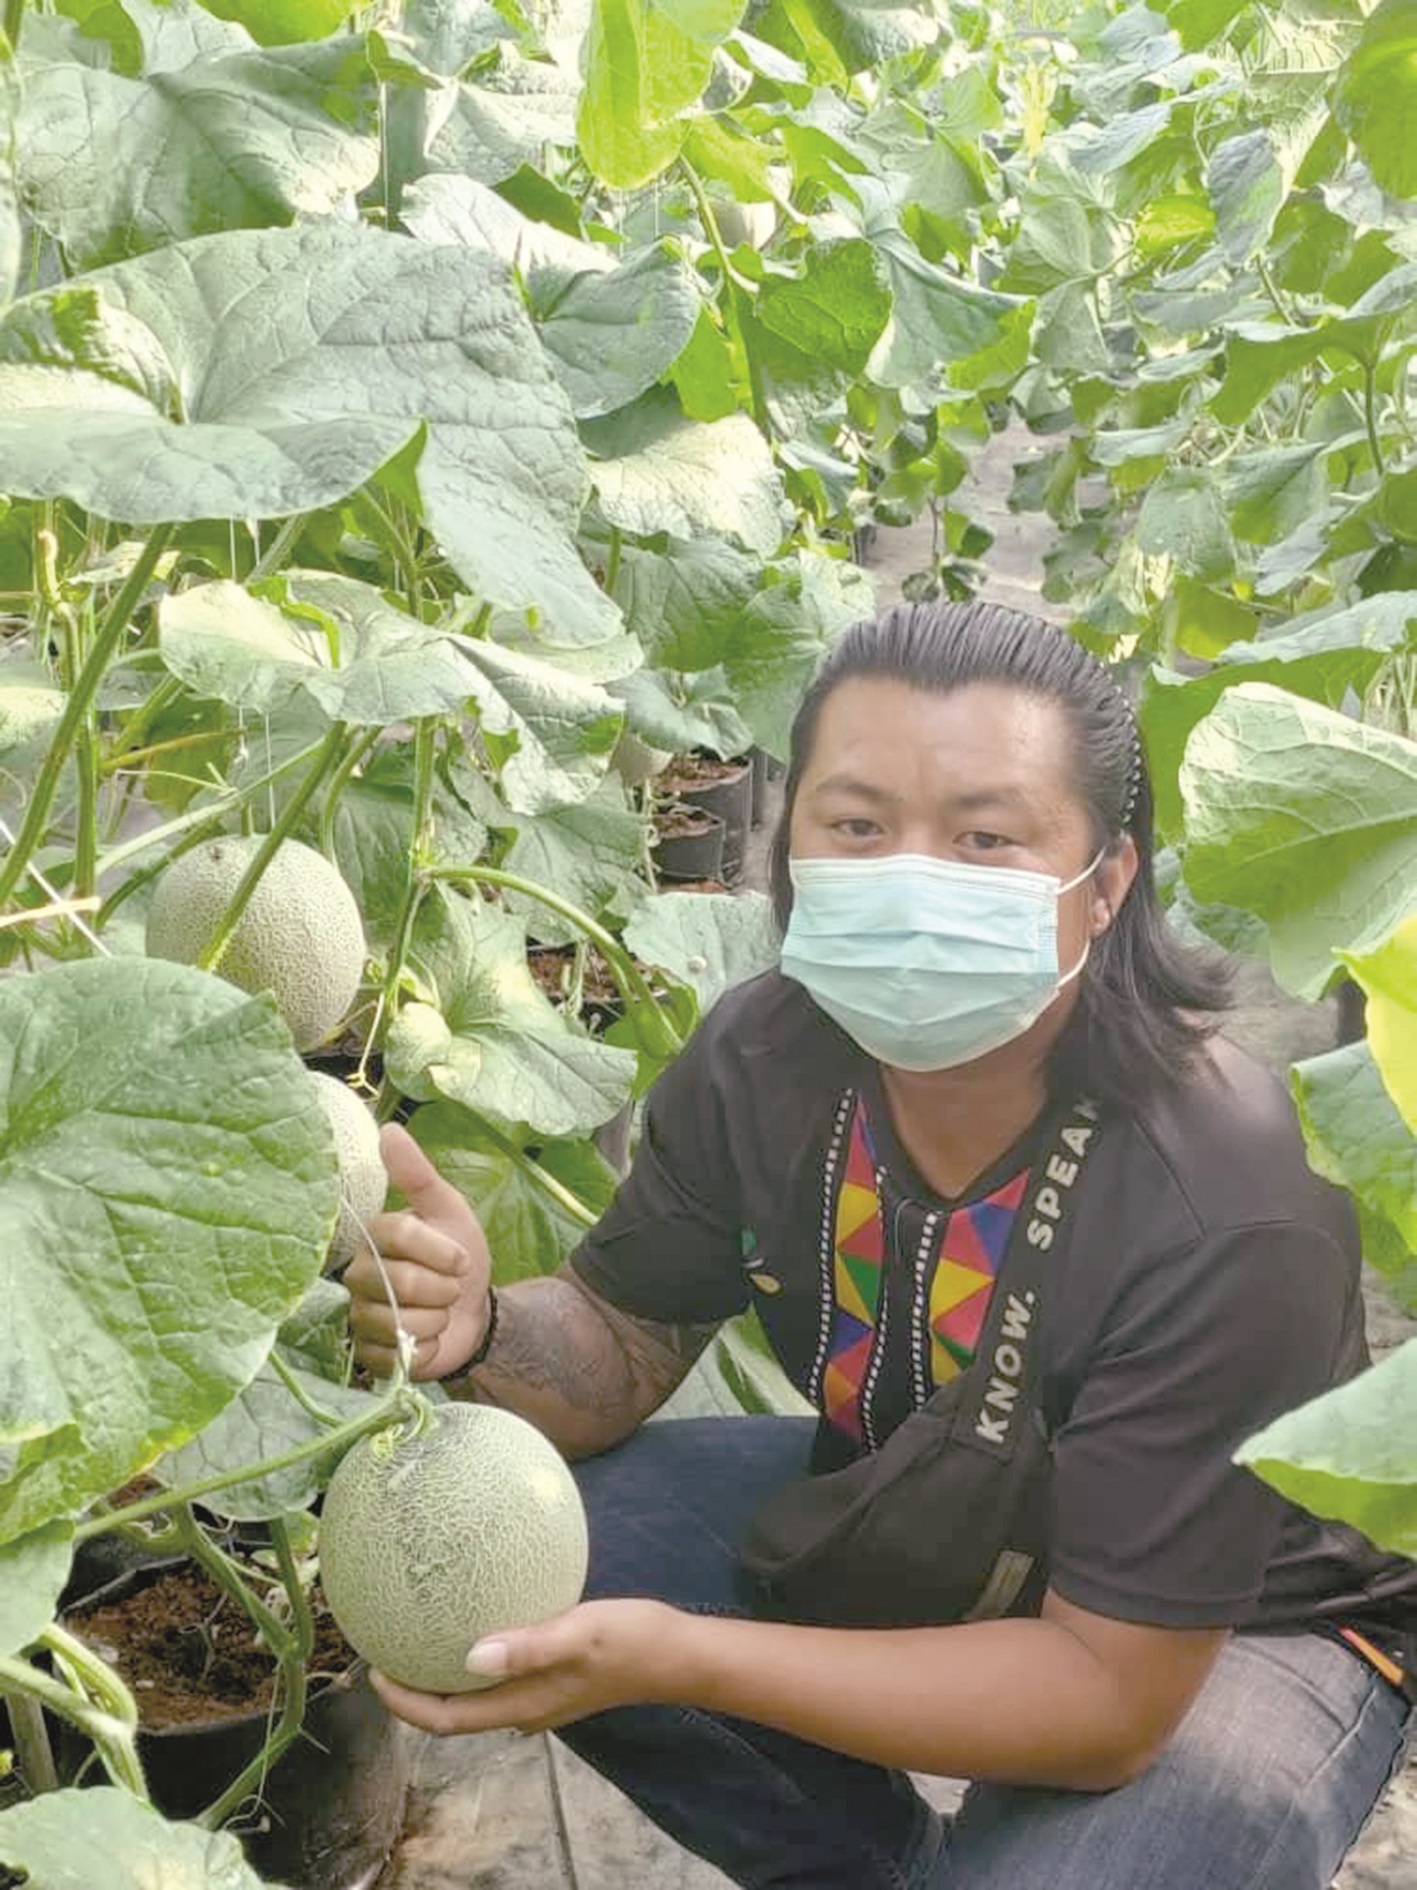 Self-taught Rowelon reaps success from rockmelons 